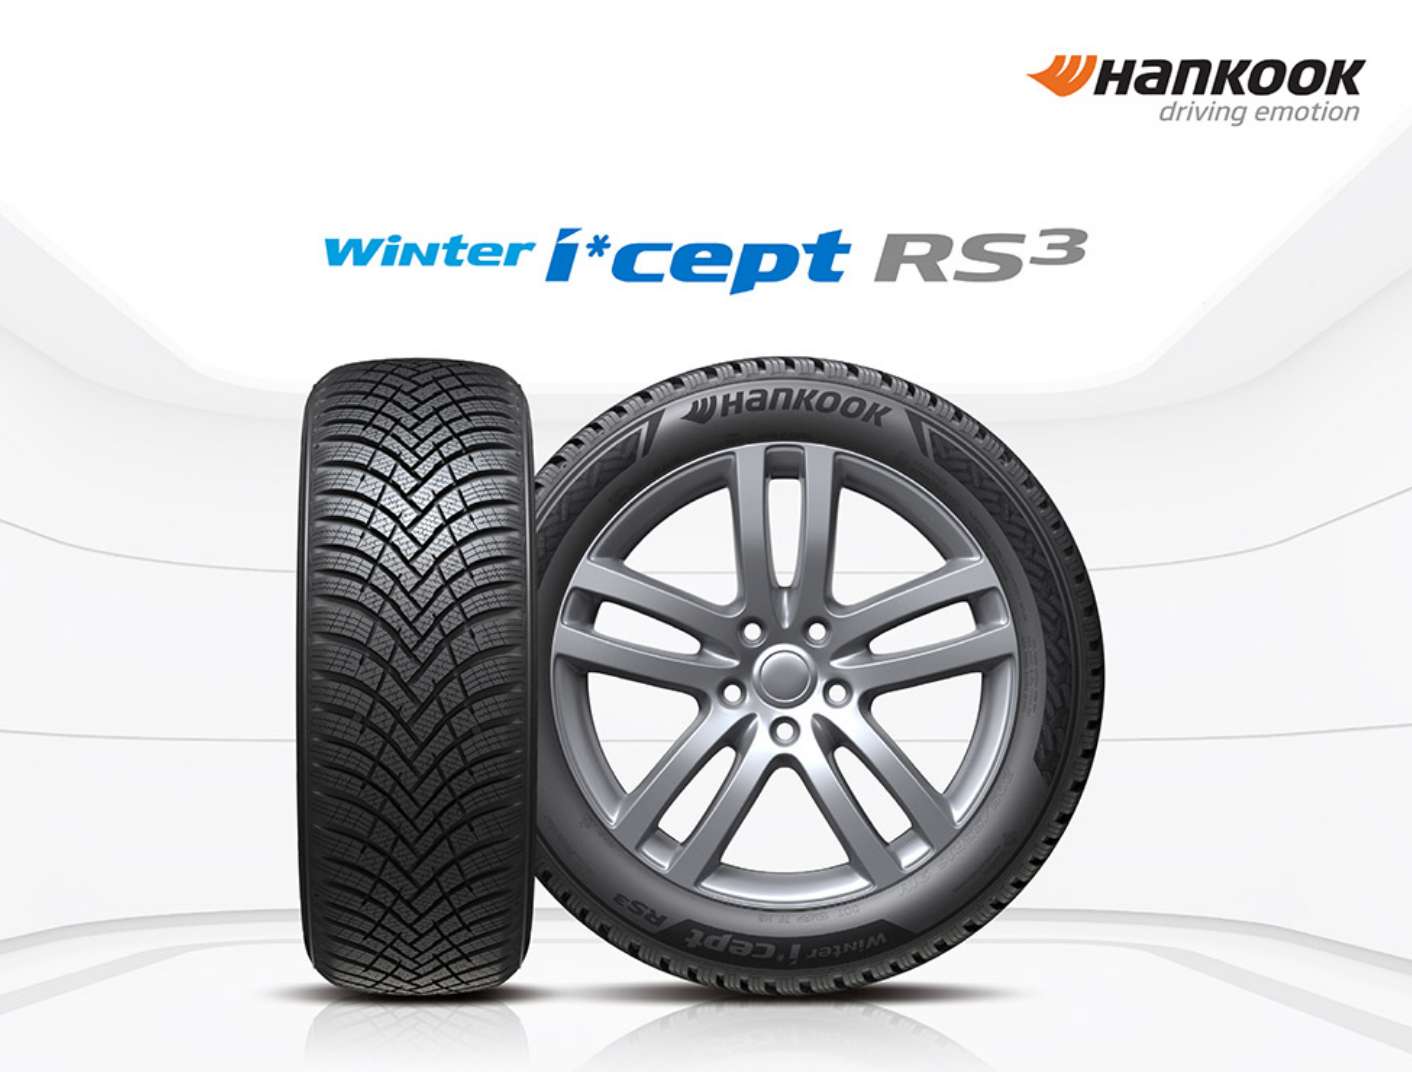 Hankook Tire launches Winter i*cept RS3 for safe winter driving